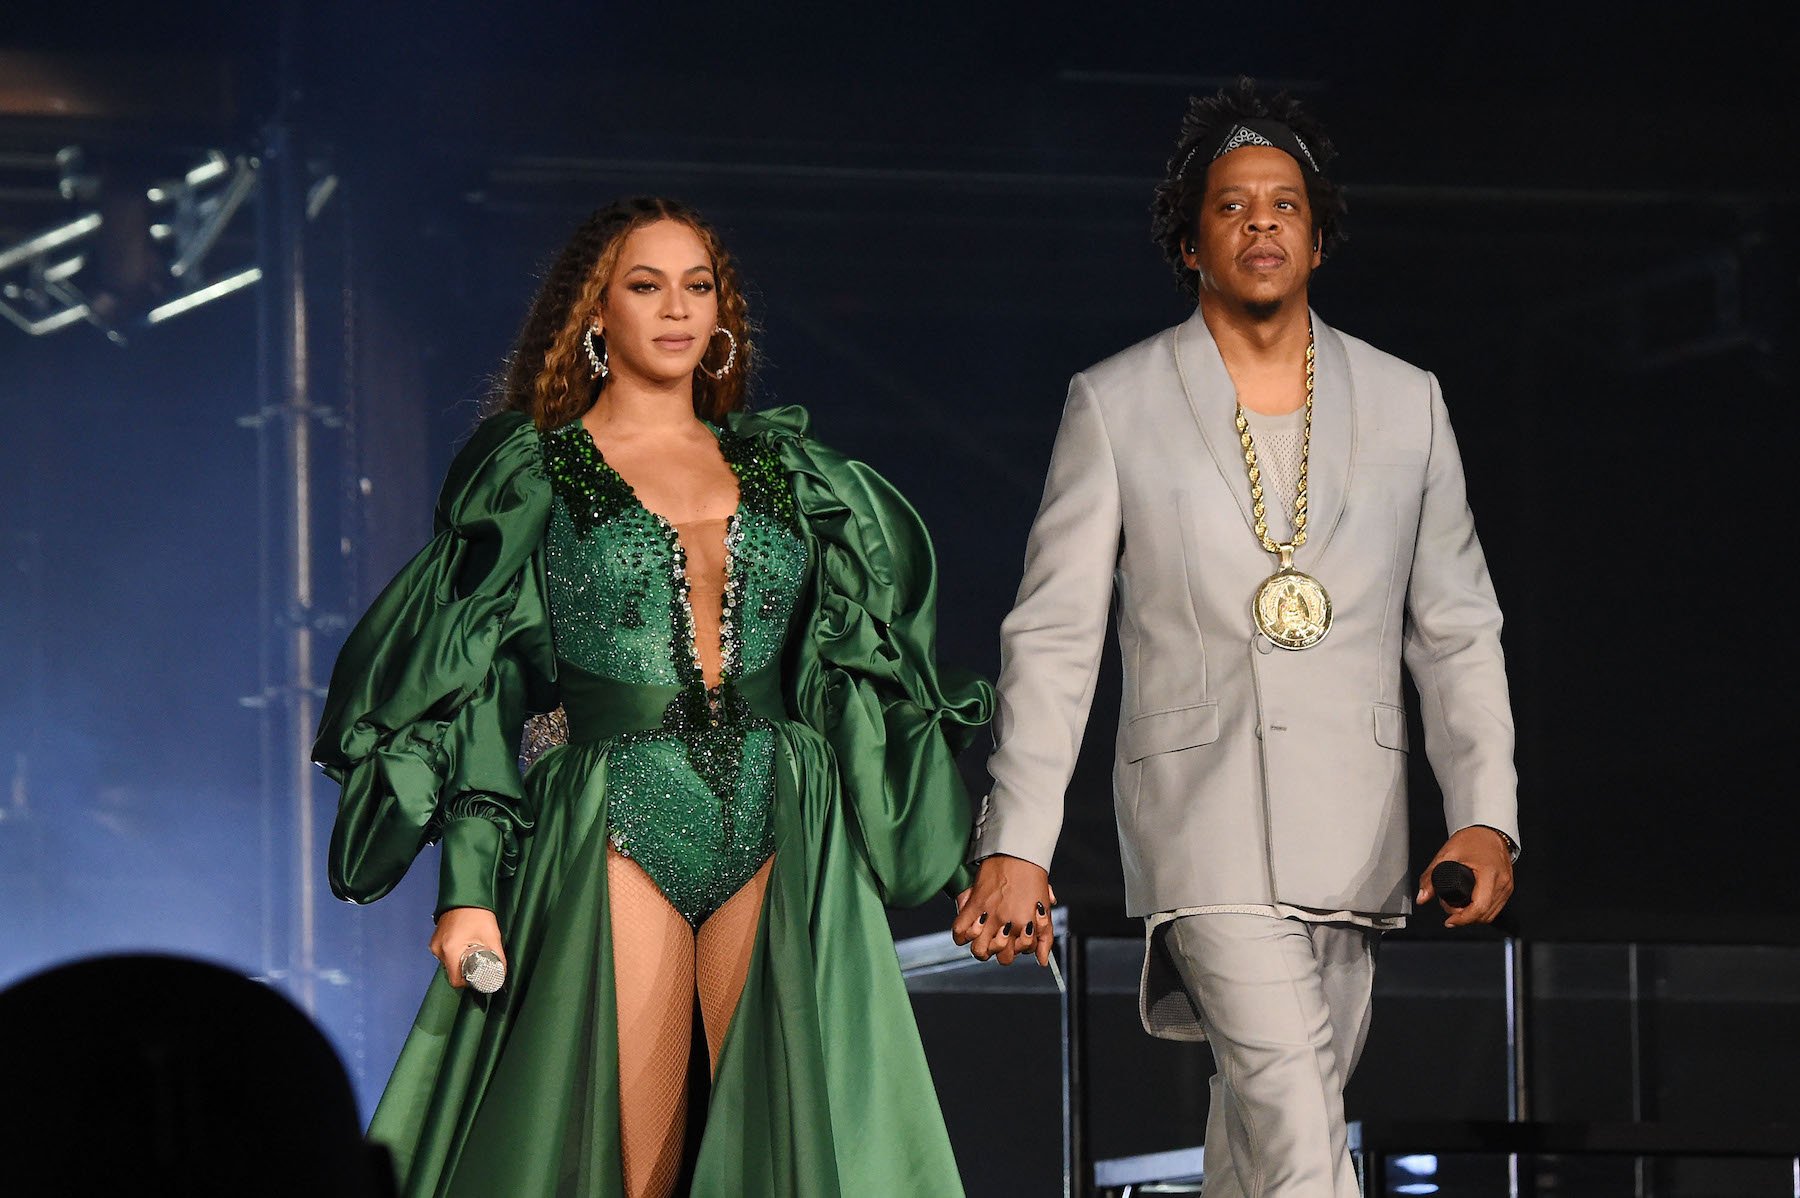 Beyoncé and Jay-Z, who have given many loving quotes about the relationship, holding hands on stage